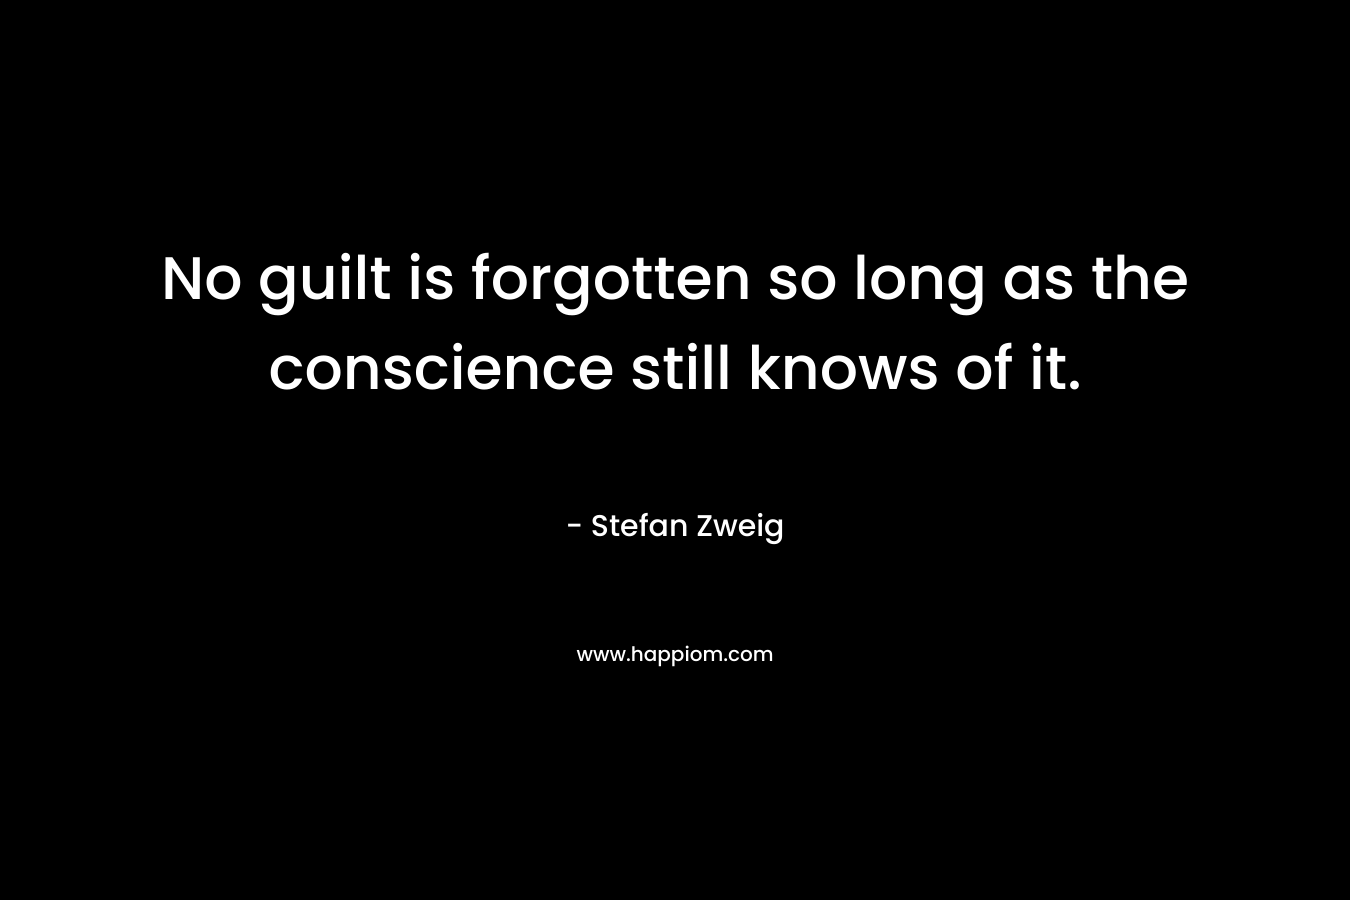 No guilt is forgotten so long as the conscience still knows of it. – Stefan Zweig